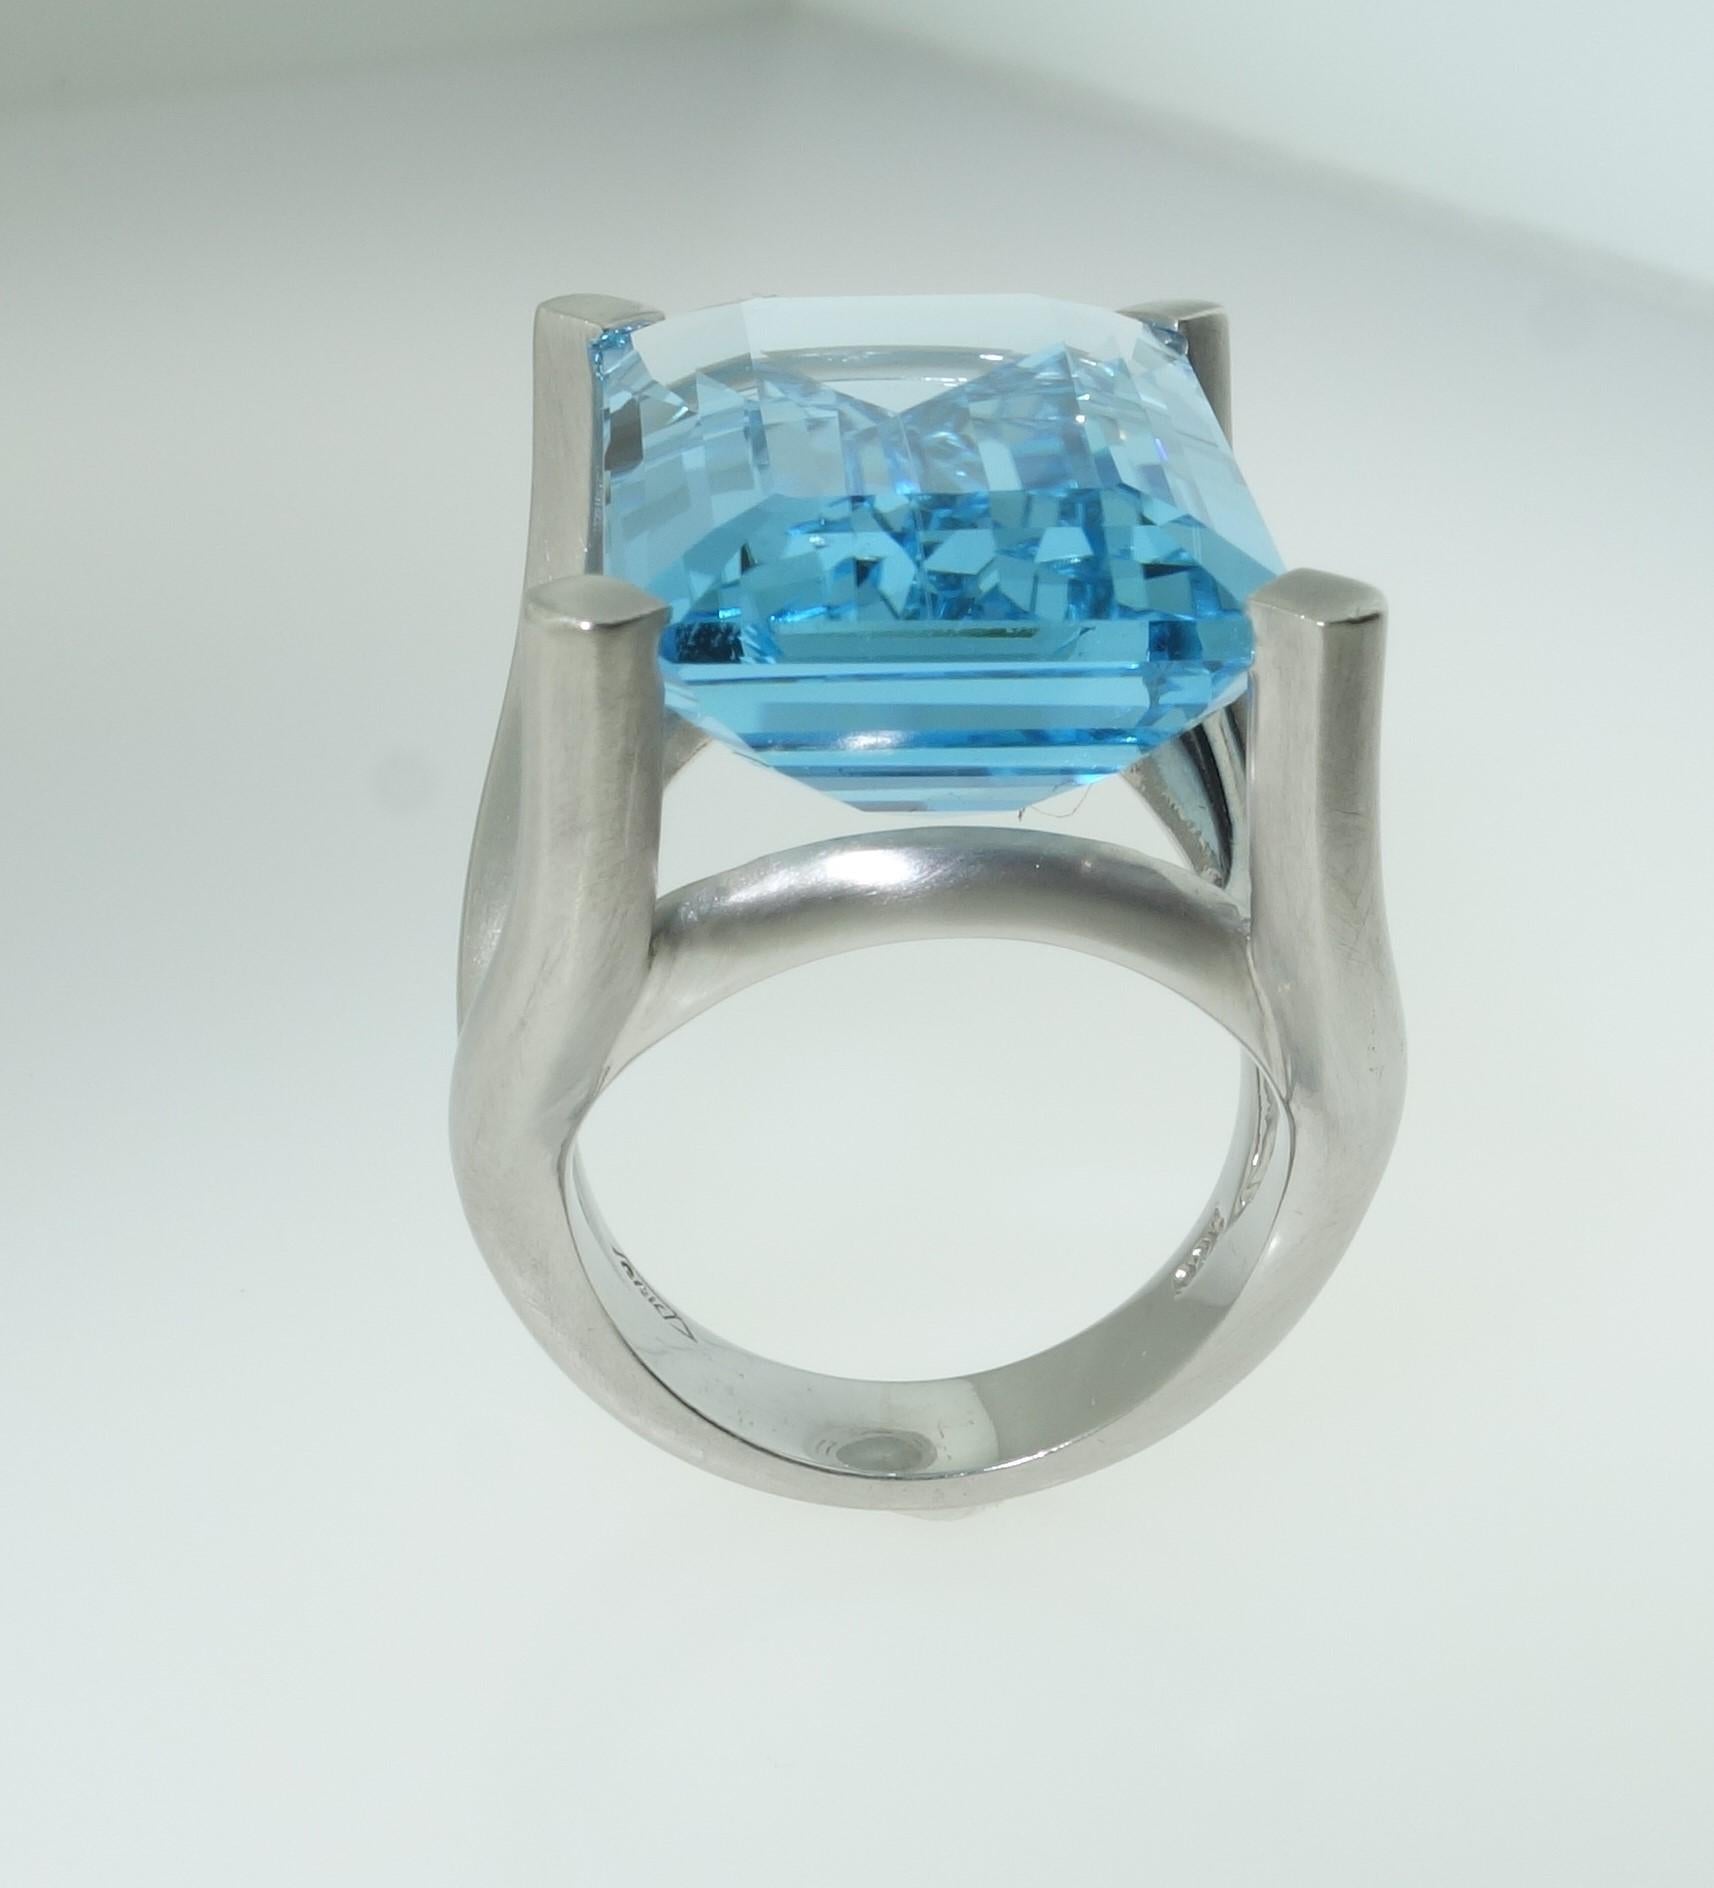 Beautiful Solitaire Ring featuring a 31.90 Carat Rectangular Sky Blue Topaz Gem stone. Oxidized Sterling Silver Tarnish-resistant mounting. Ring size 7, we offer ring re-sizing. Stylish and Classy…illuminating your look with Timeless Beauty! 